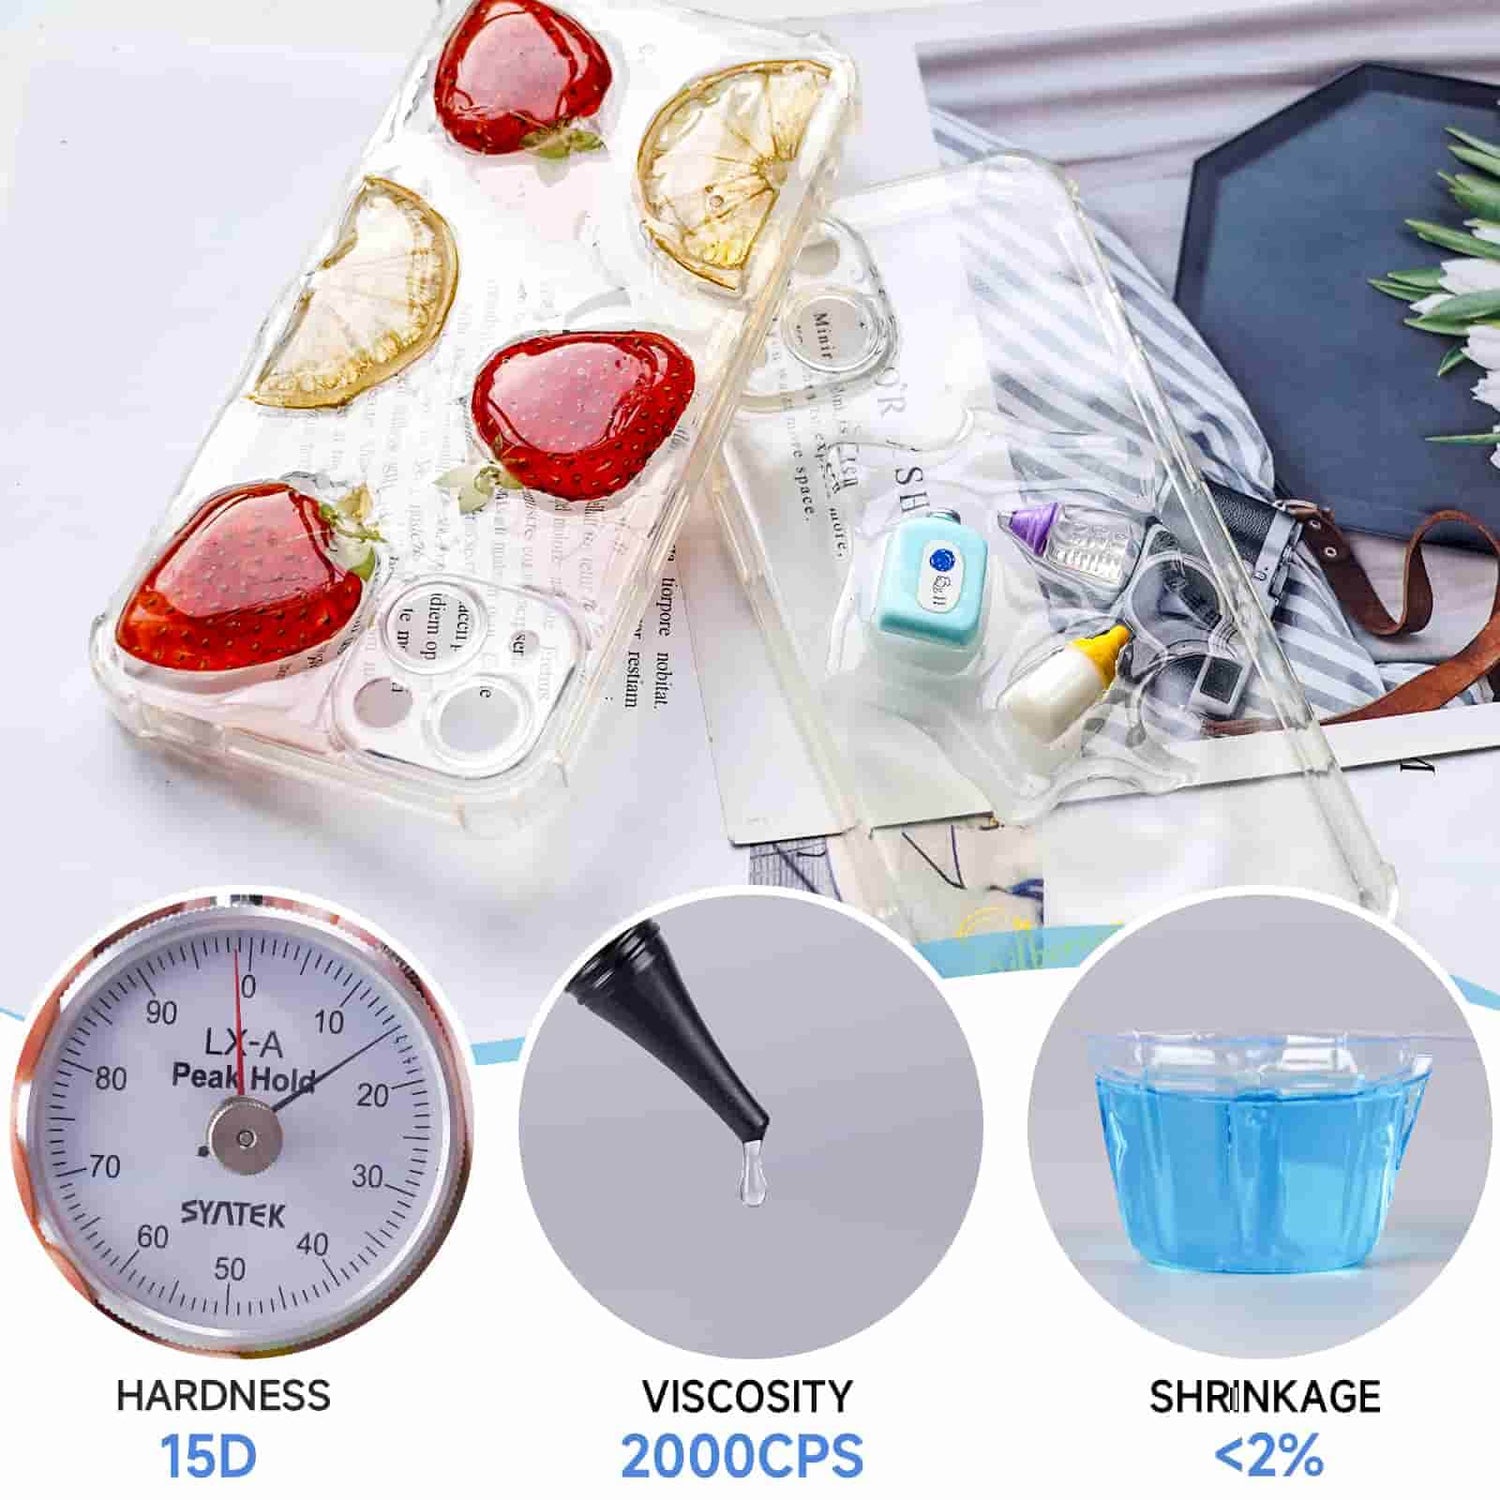 UV Resin Kit with Light,153Pcs Resin Jewelry Making Kit with